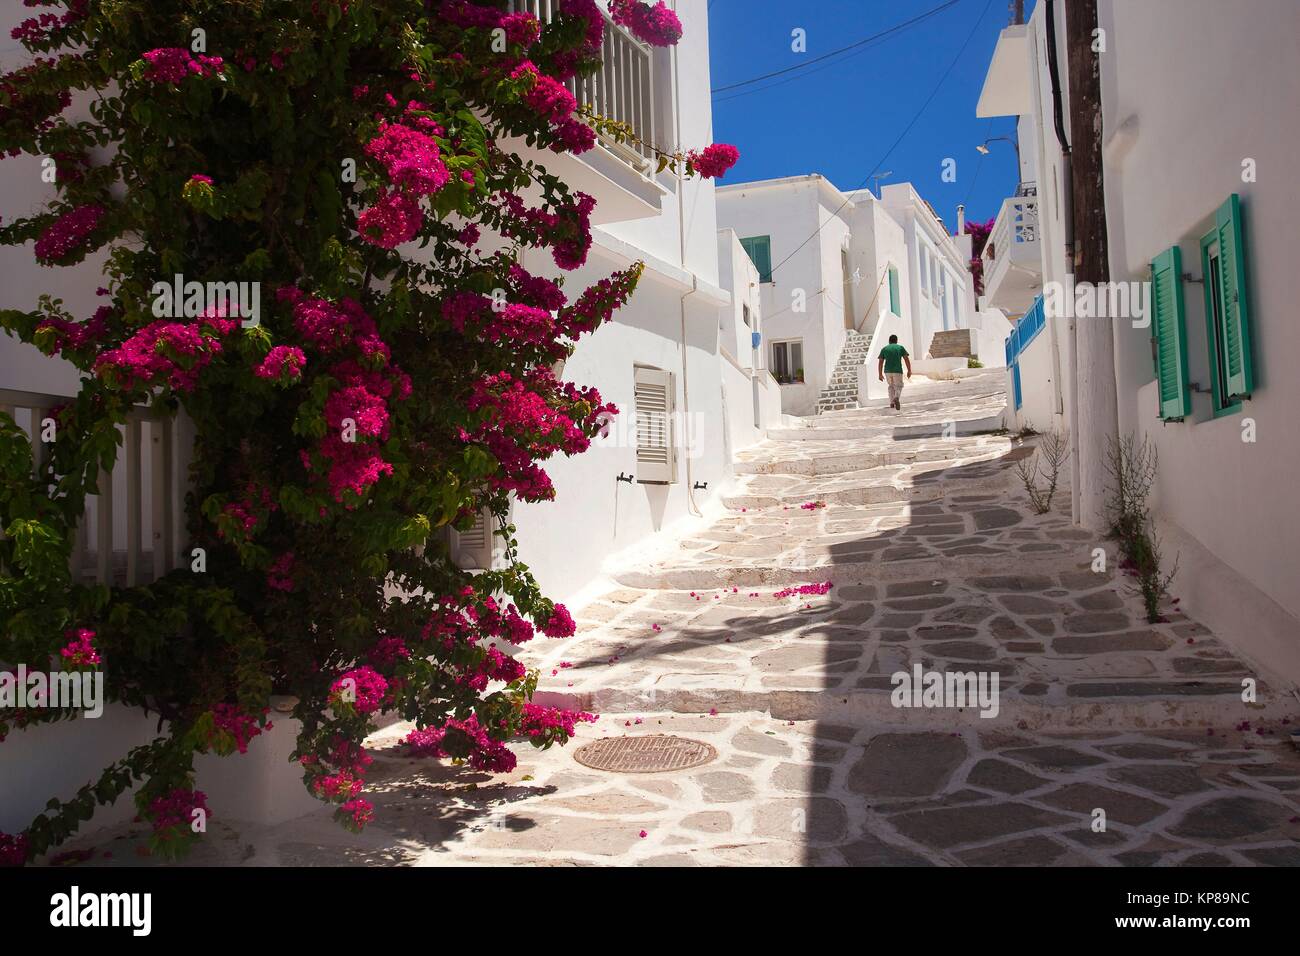 Man walking in the alleys of the Naoussa town Paros, Cyclades Islands, Greek Islands, Greece, Europe. Stock Photo